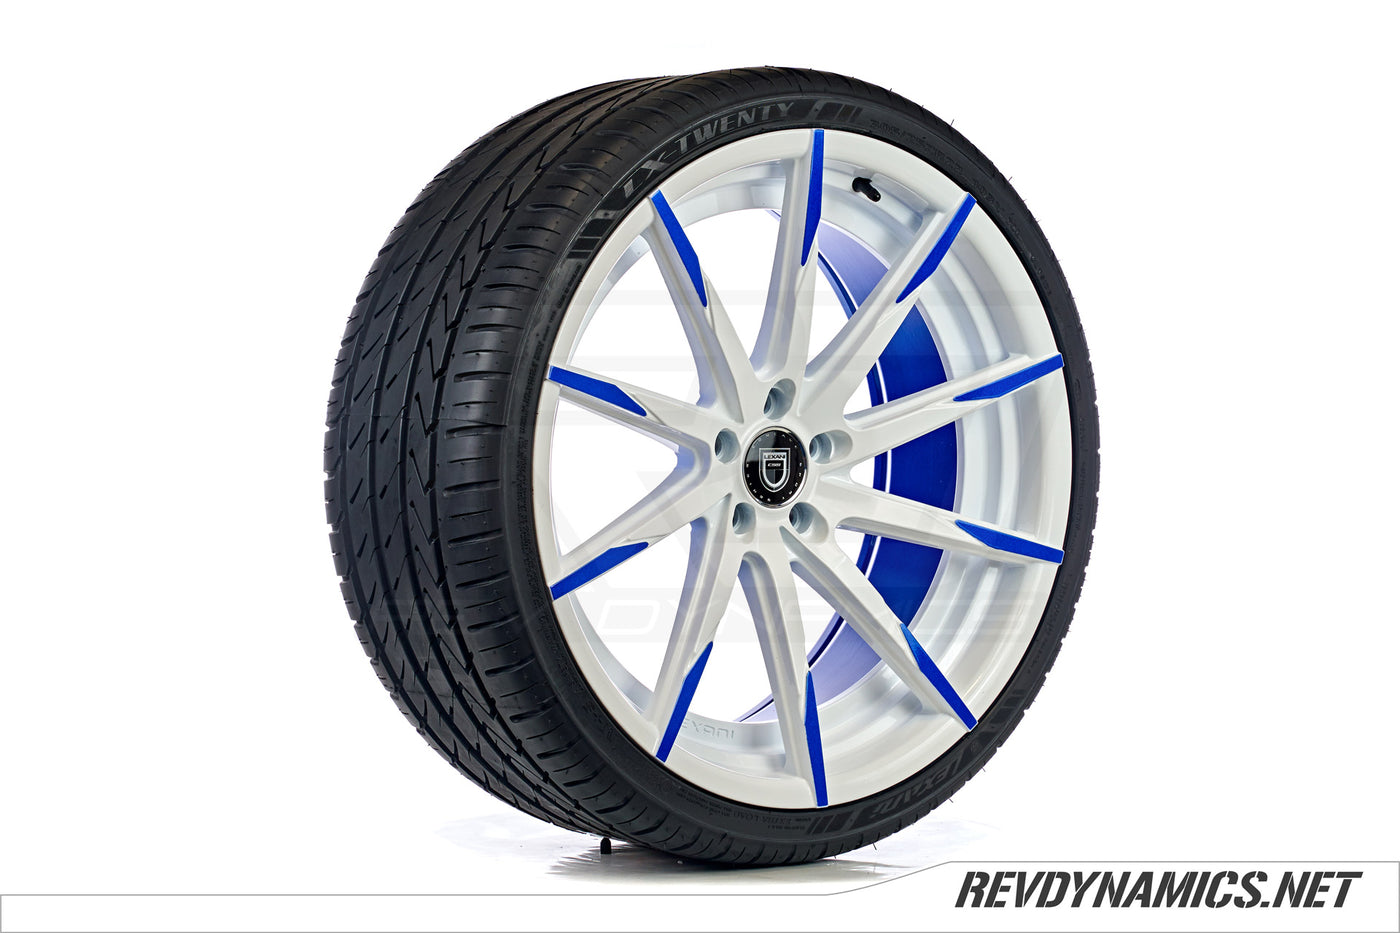 Lexani CSS-15 22" Rim Powdercoated White and Stealth Blue Polaris Slingshot colors 